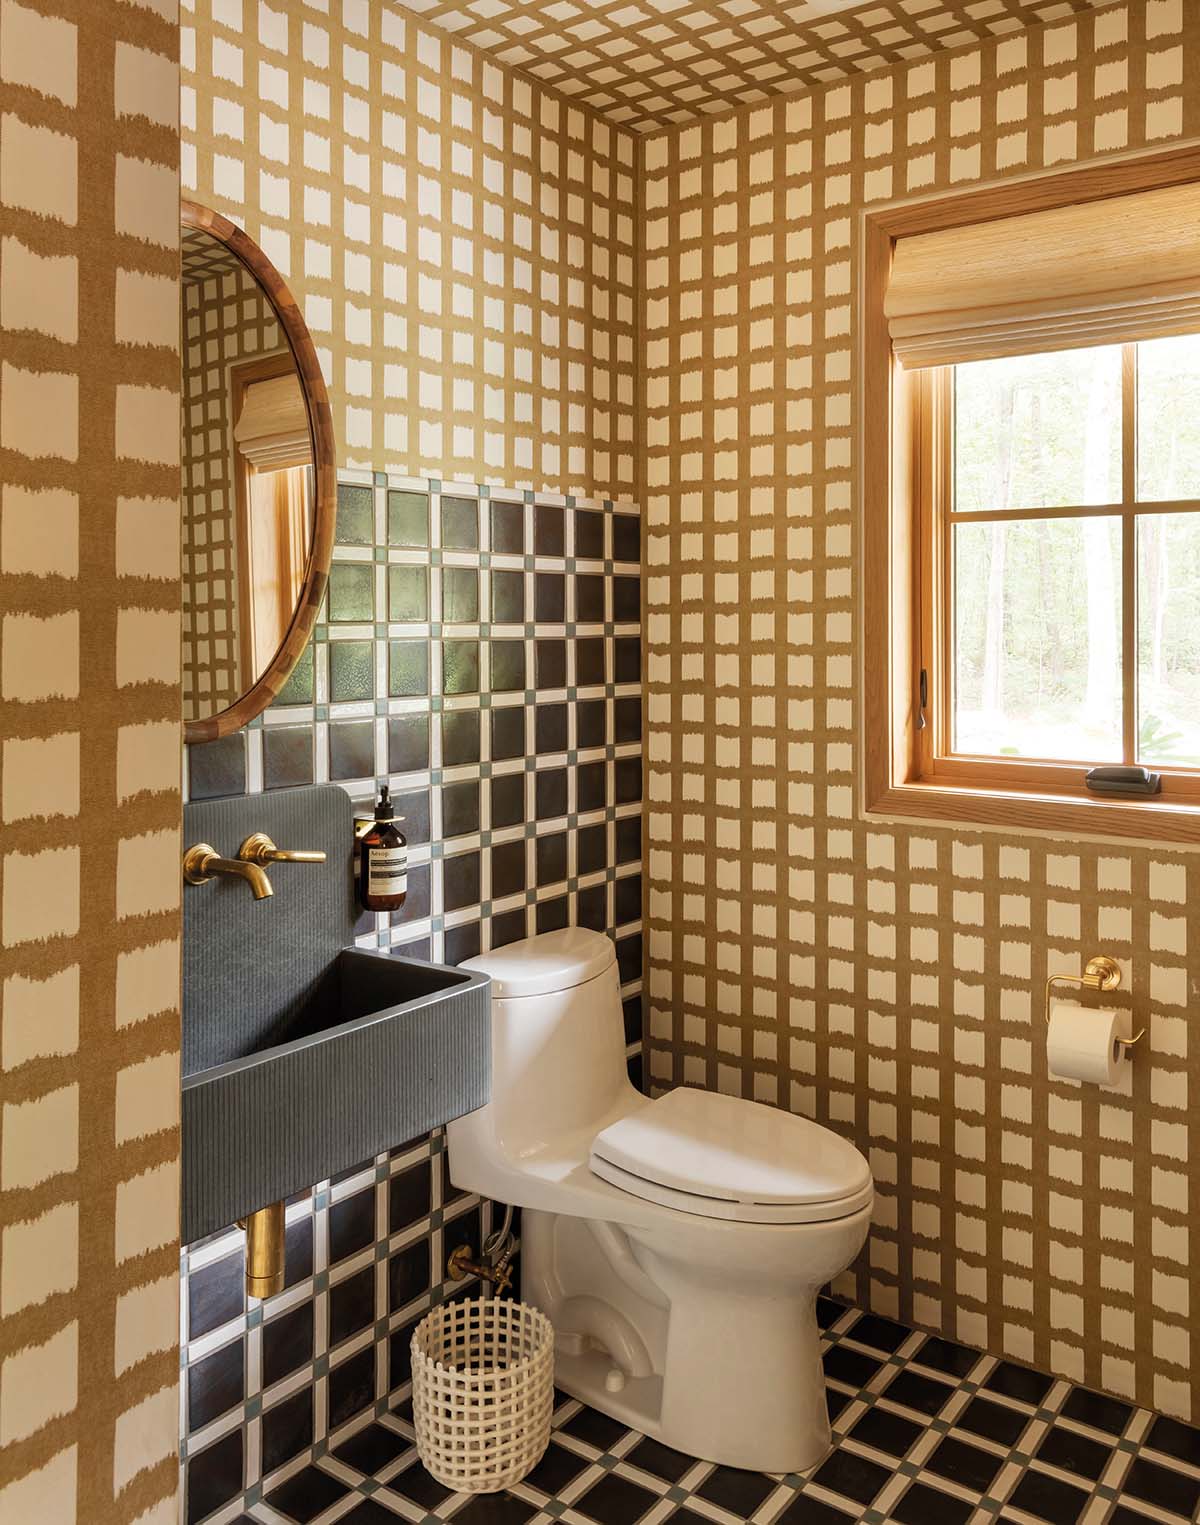 A bathroom. The sink is black with gold taps and the walls are patterned in two types of check, one brown and white and the other white, charcoal and green and covers the floor and area behind the sink and toilet.